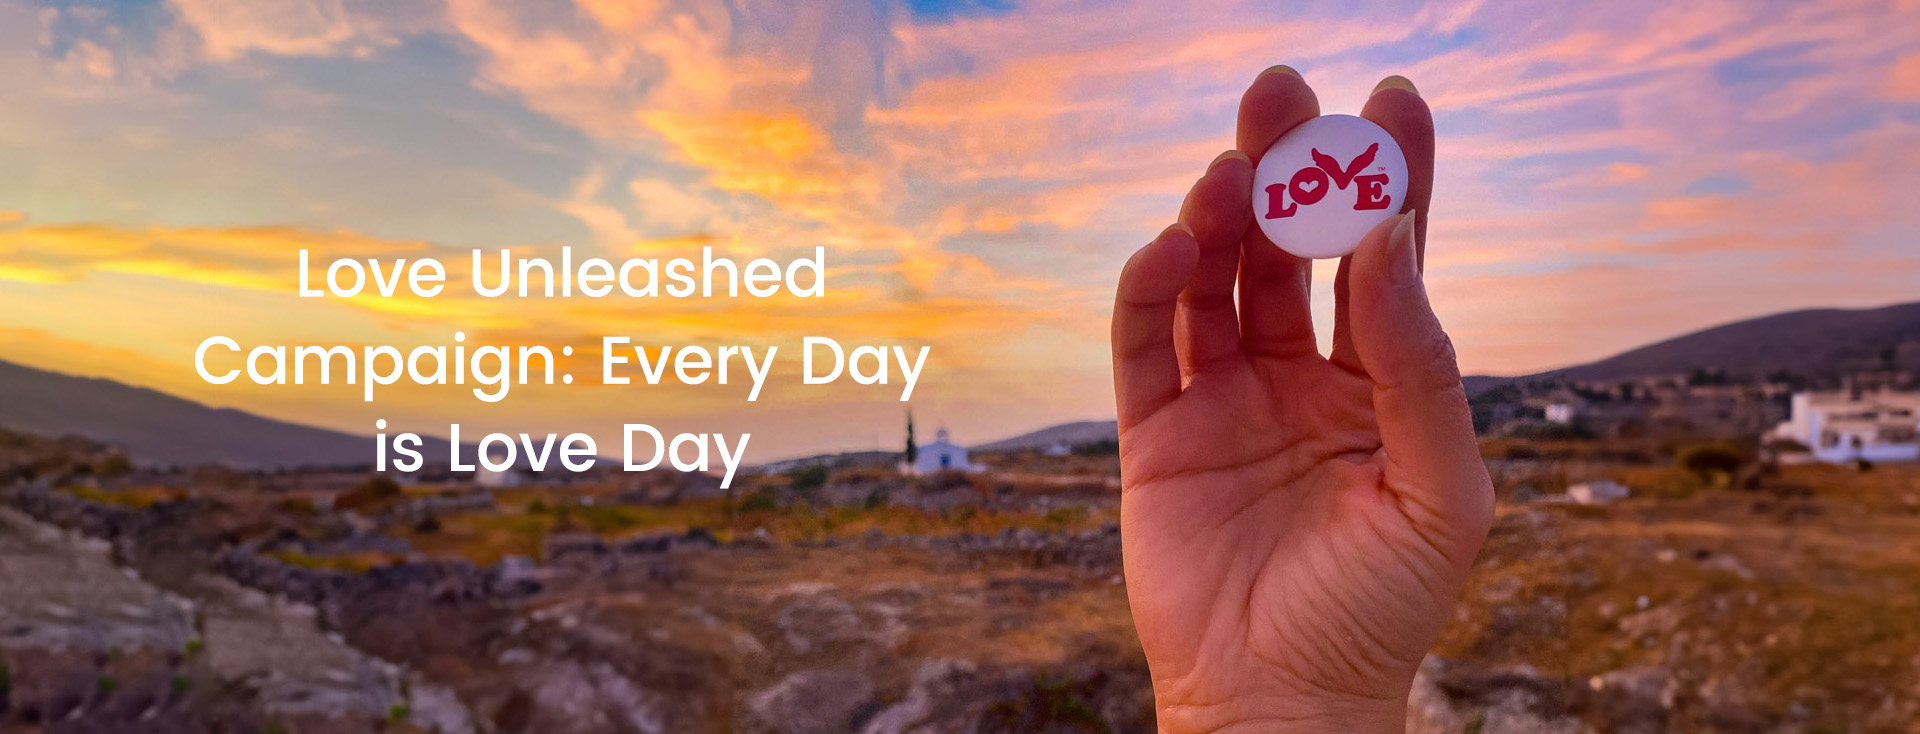 Love Unleashed Campaign: Every Day is Love Day